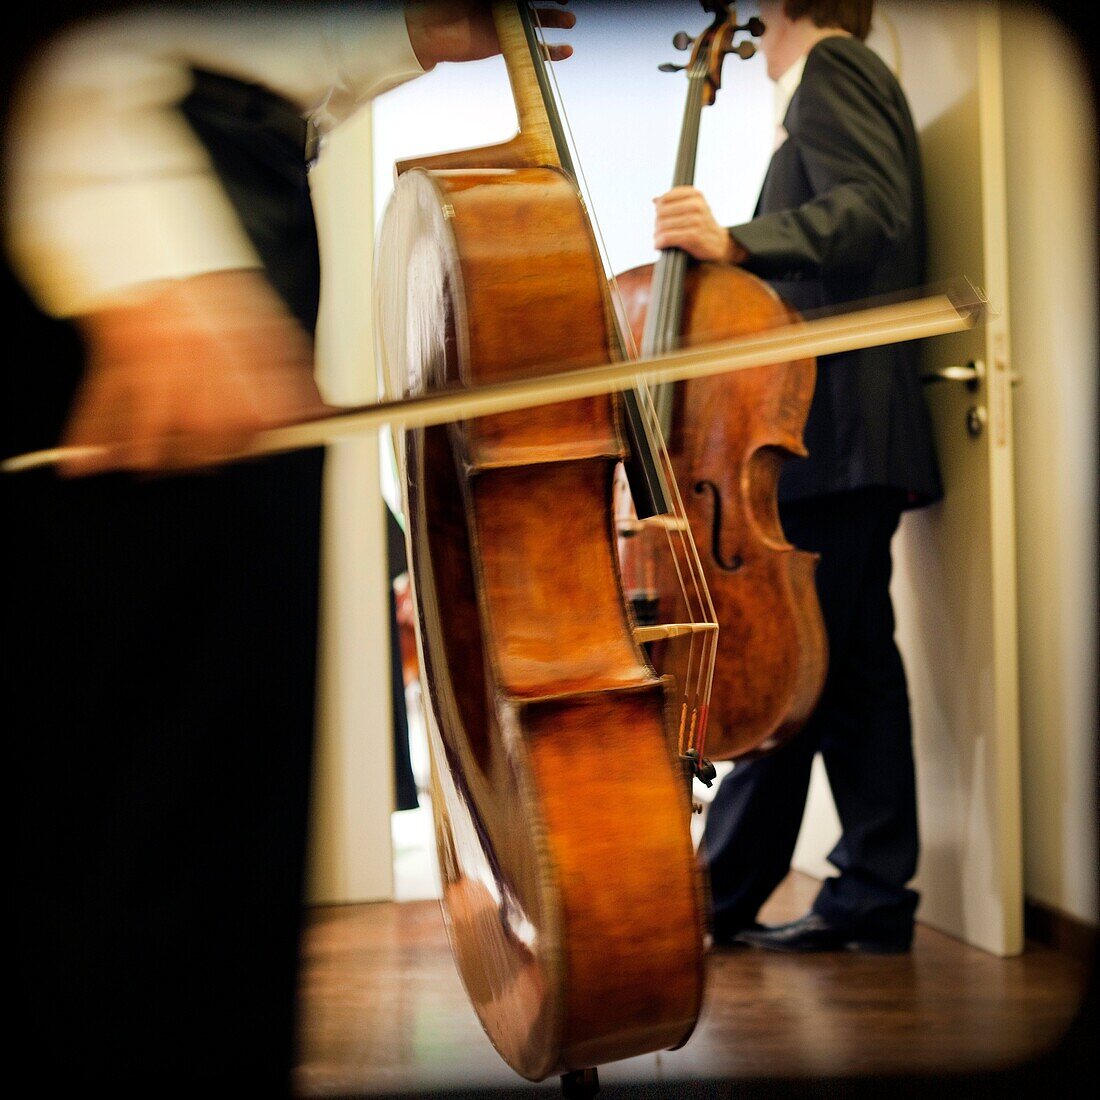 Musicians cellist in an orchestra rehearsing with their cellos before entering the stage of a theater